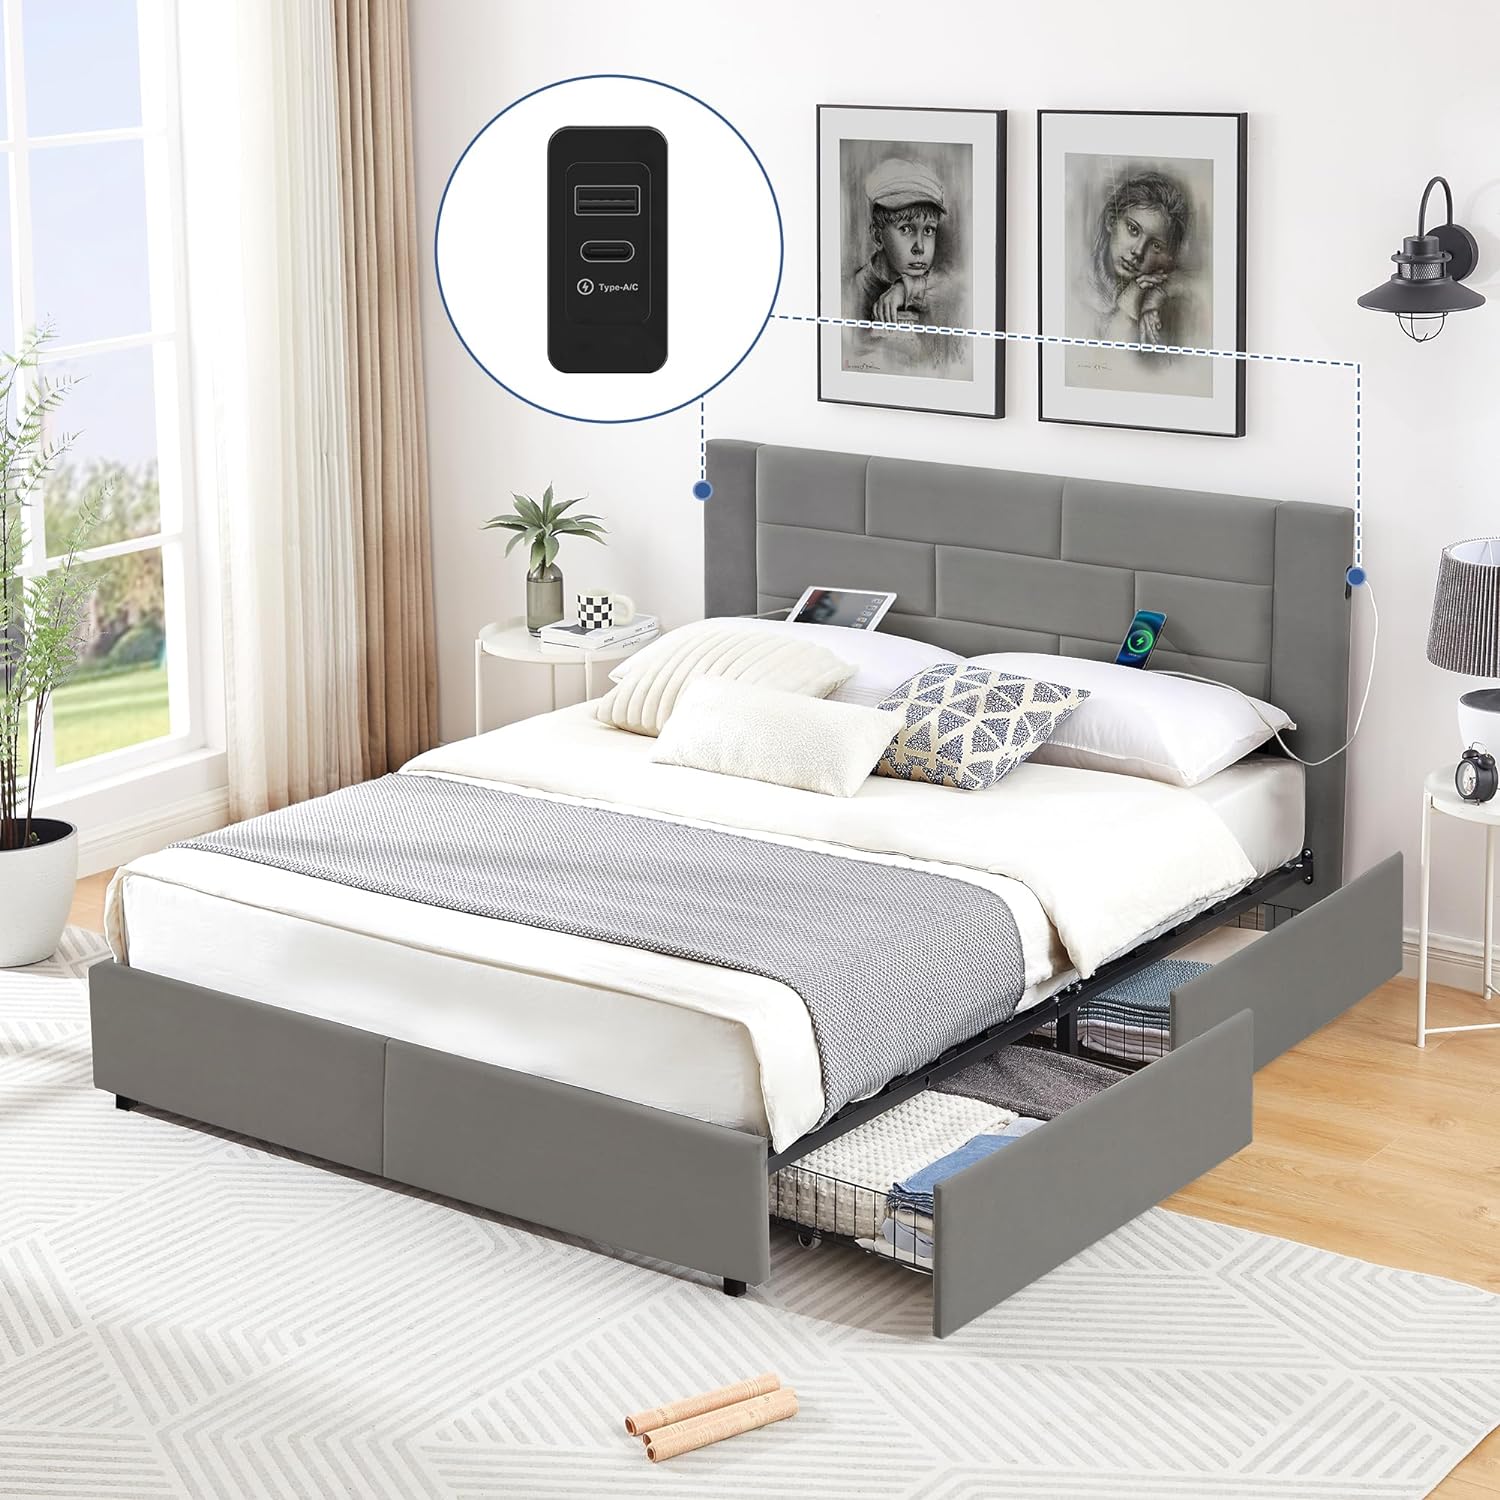 Modern Upholstered Bed Frame with USB Charge Station-Ports for Type A & Type C